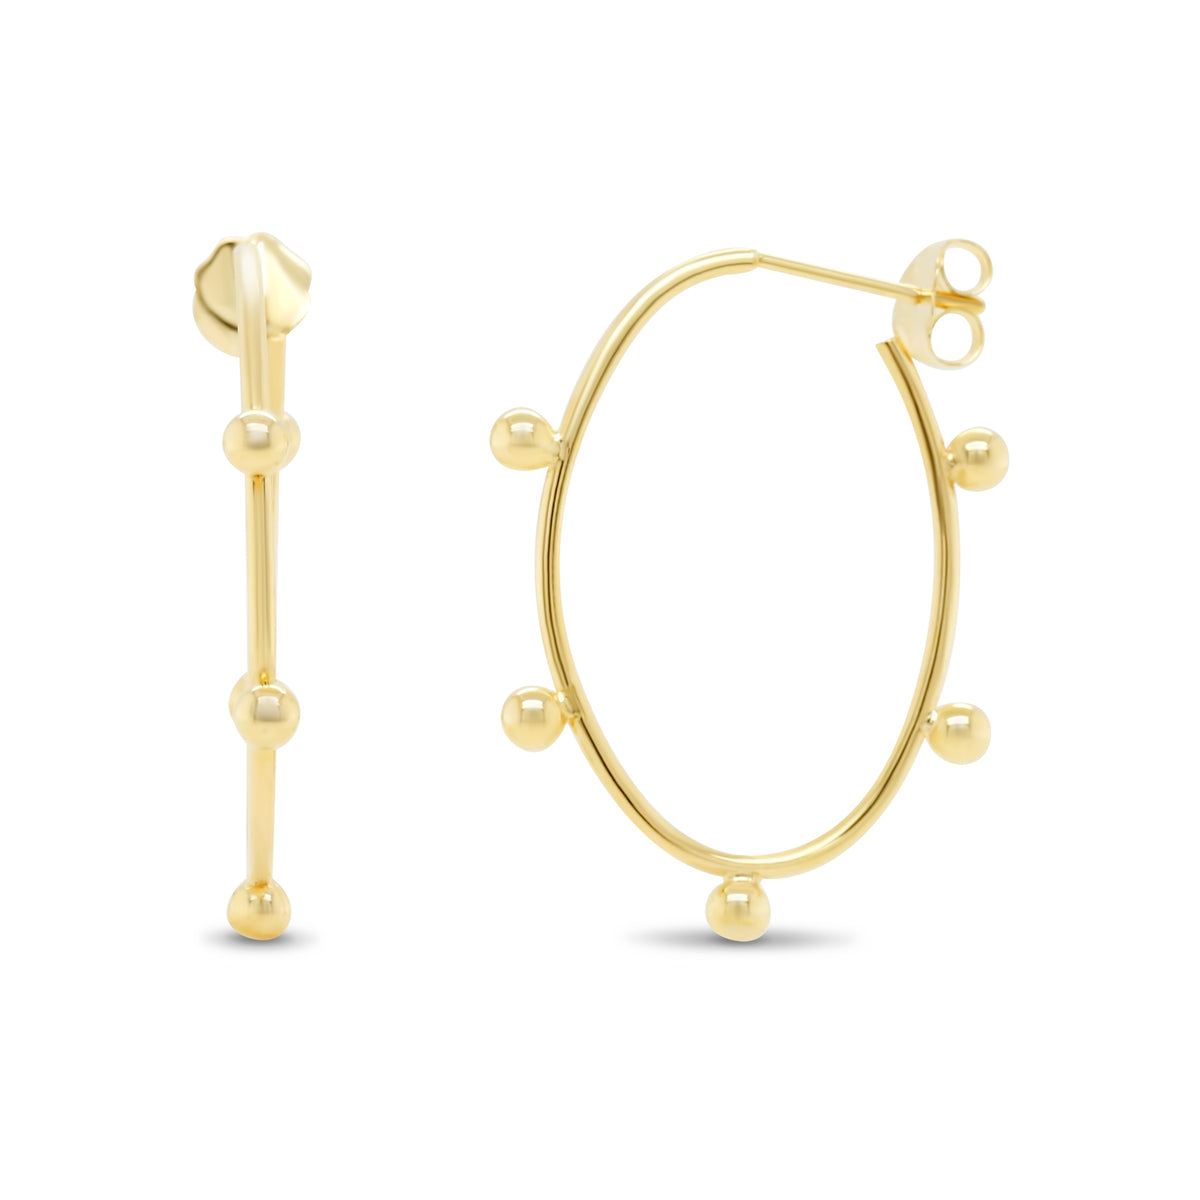 14k yellow gold elongated oval hoop earrings with solid gold ball detailing